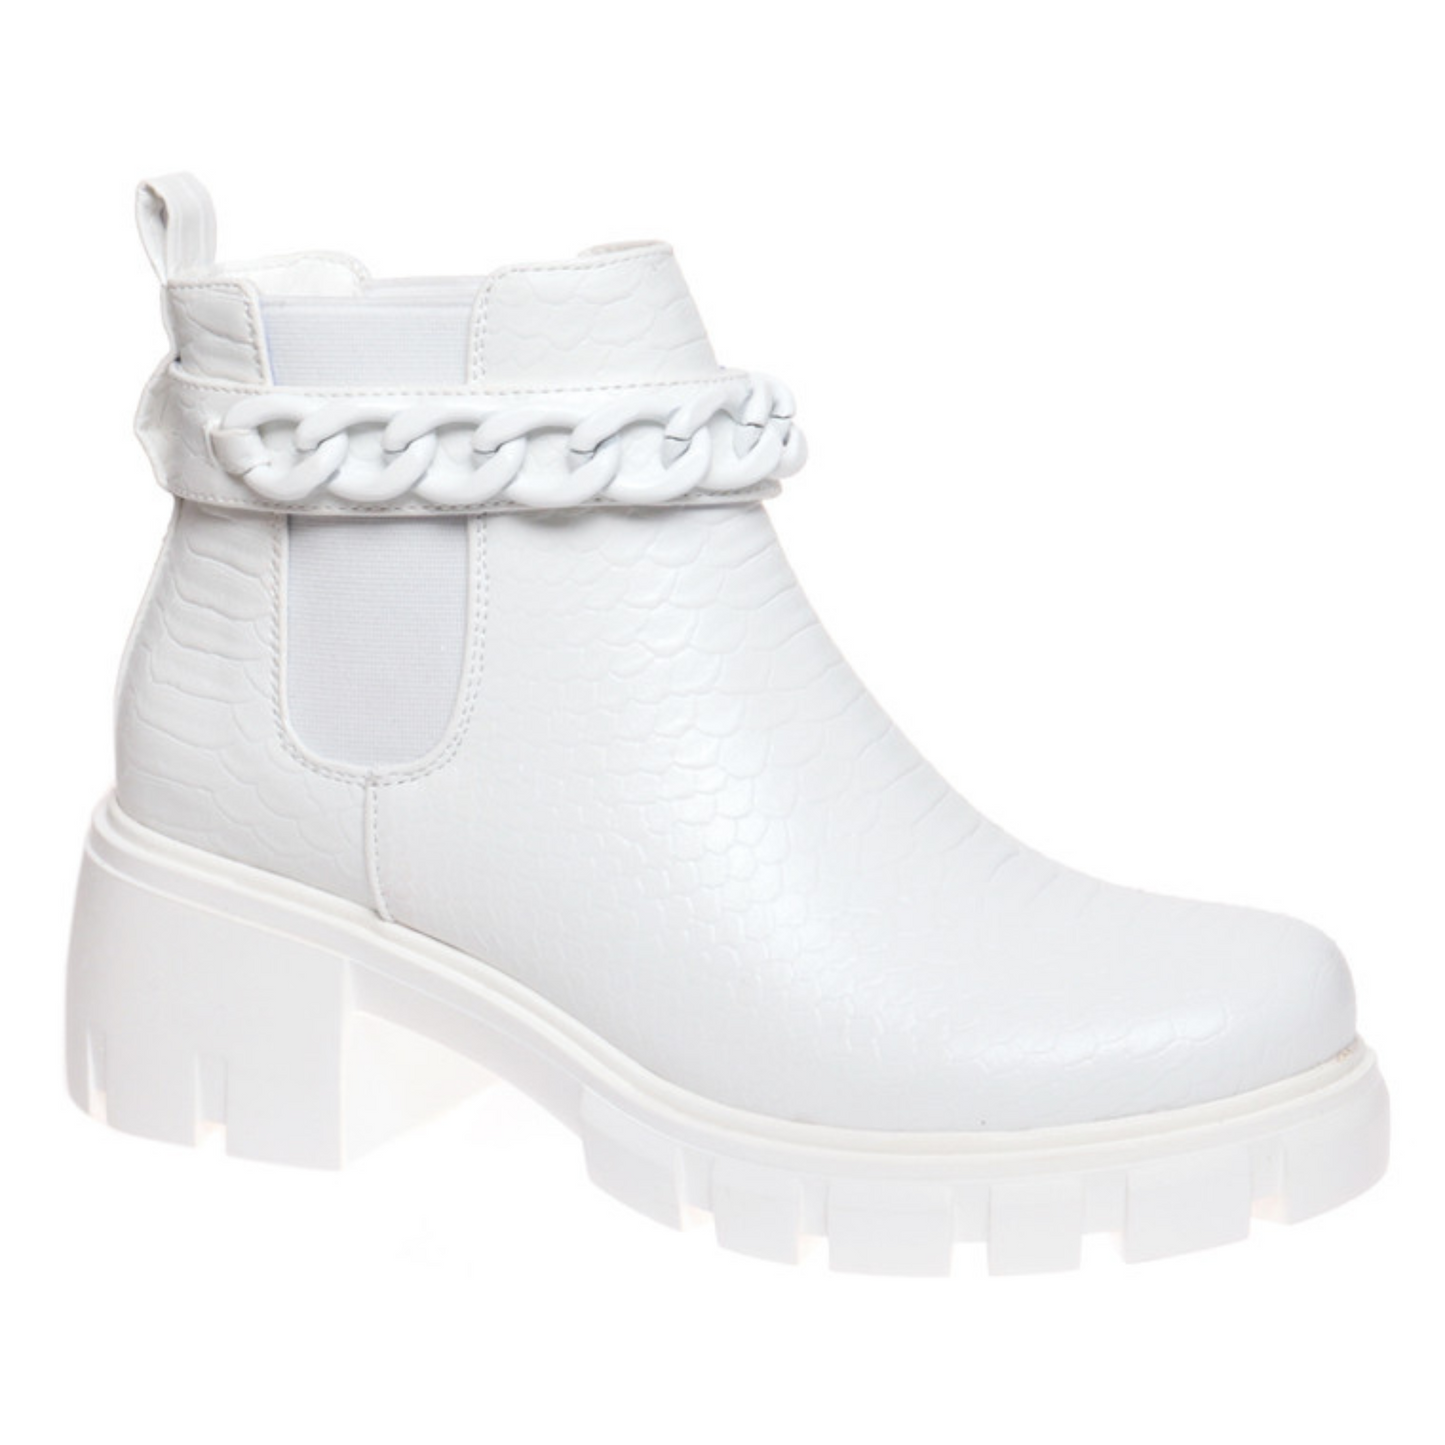 The Camden-3 booties by Pierre Dumas are an essential for any wardrobe. Featuring a white color and chain link accent, these classic heel booties are sure to make a statement. Crafted with quality materials, they'll become your favorite go-to shoes.